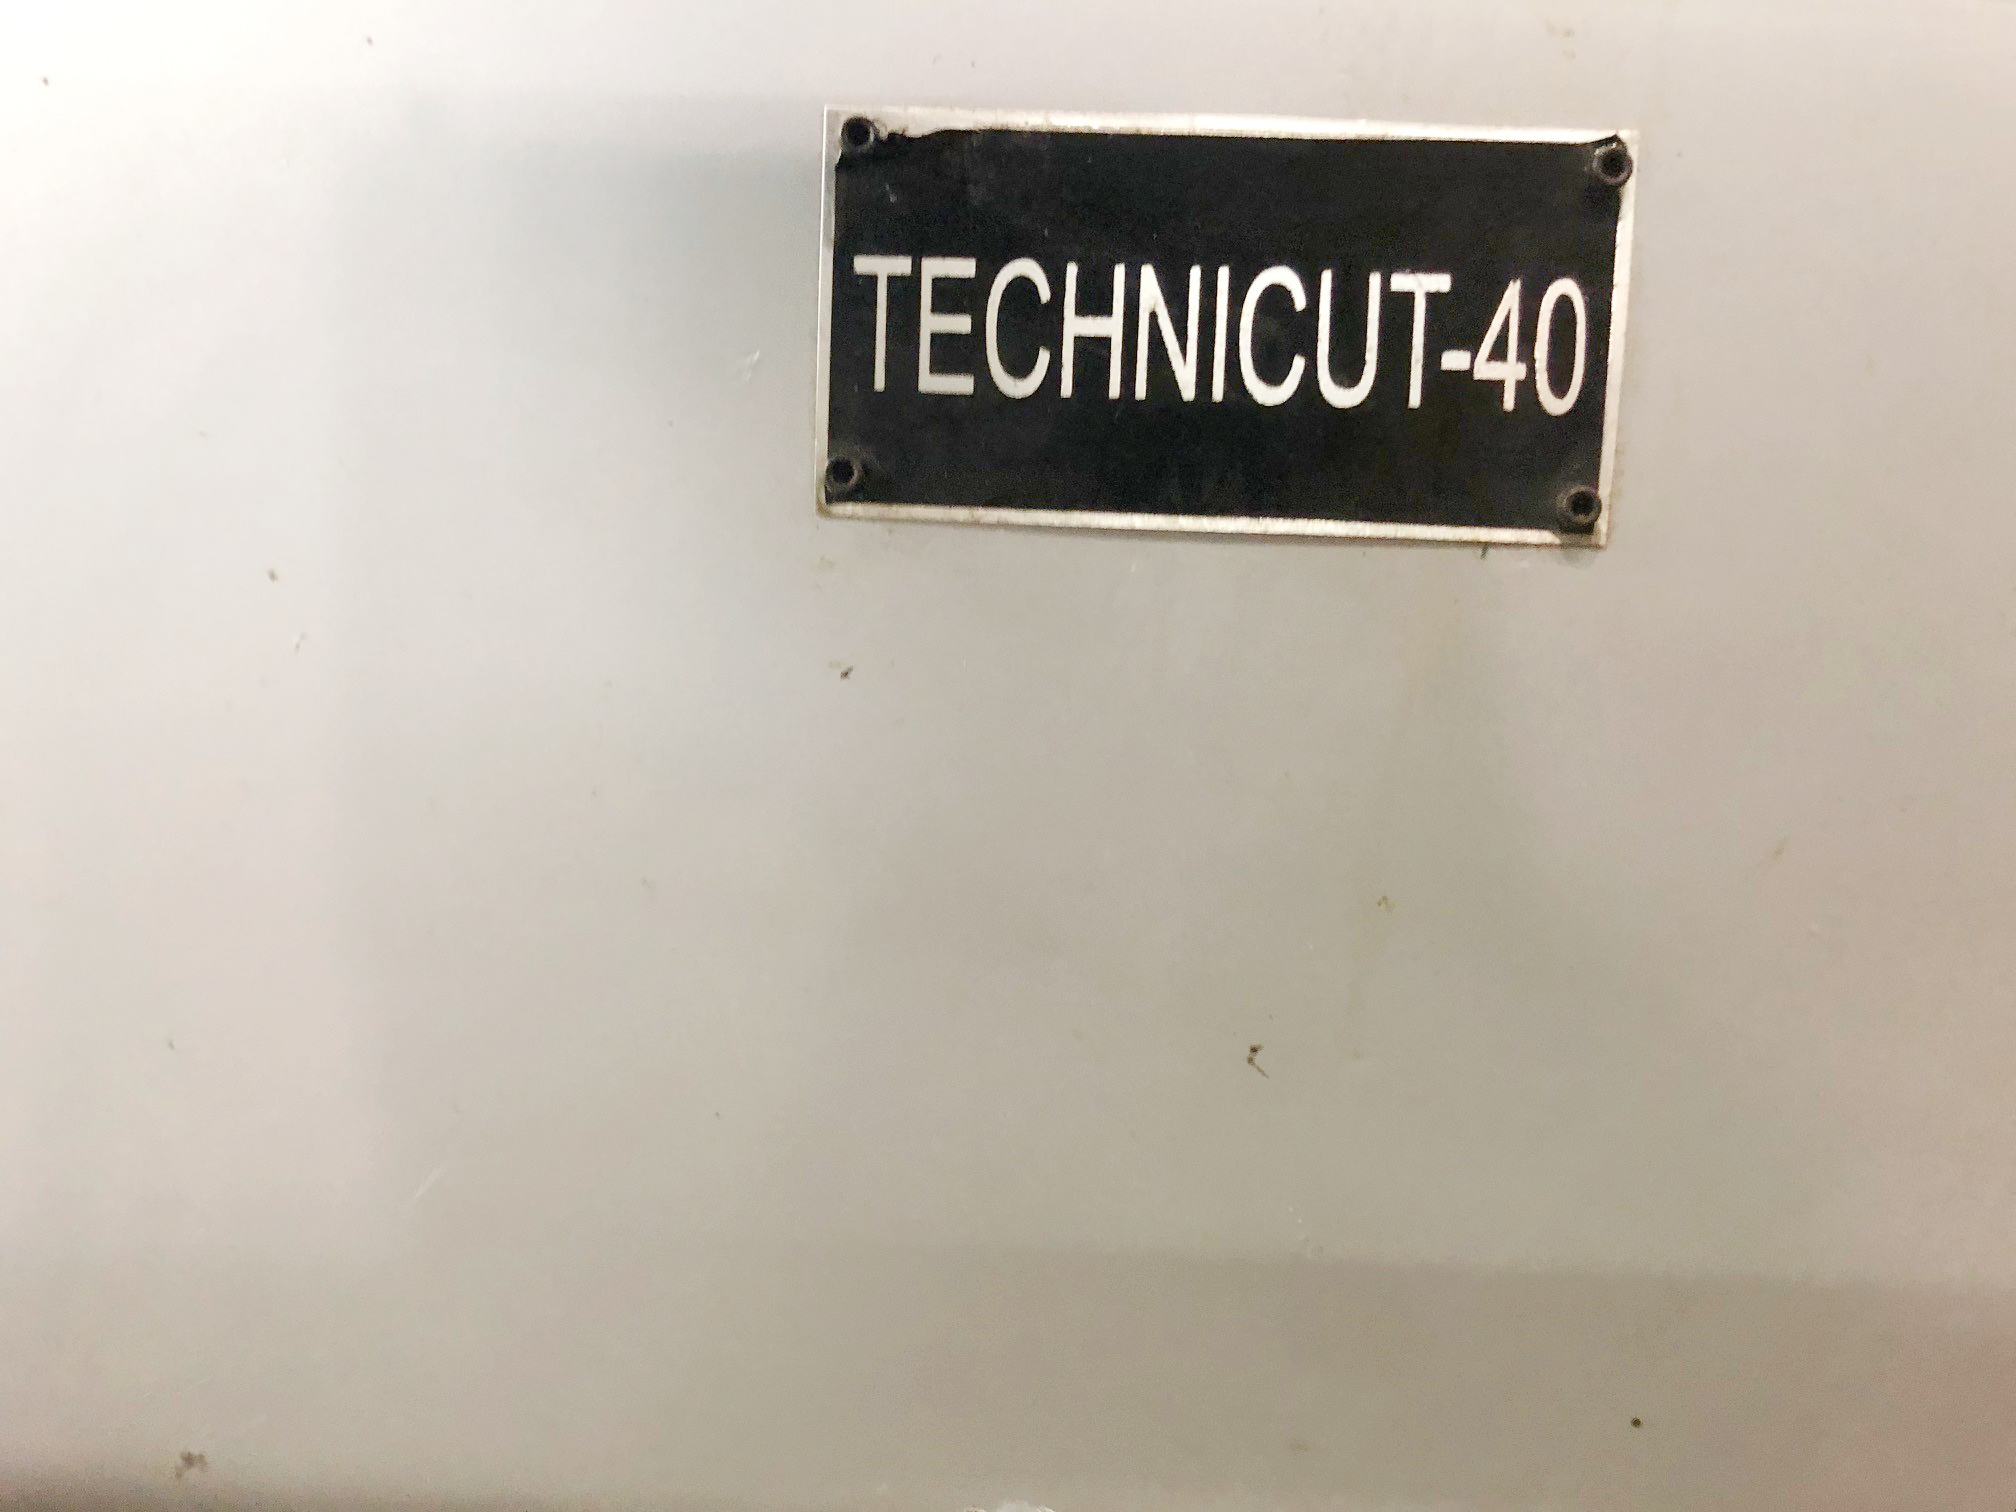 Technicut-40 Clamshell Die Cutter (used) Item # UE-121421A (Illinois)